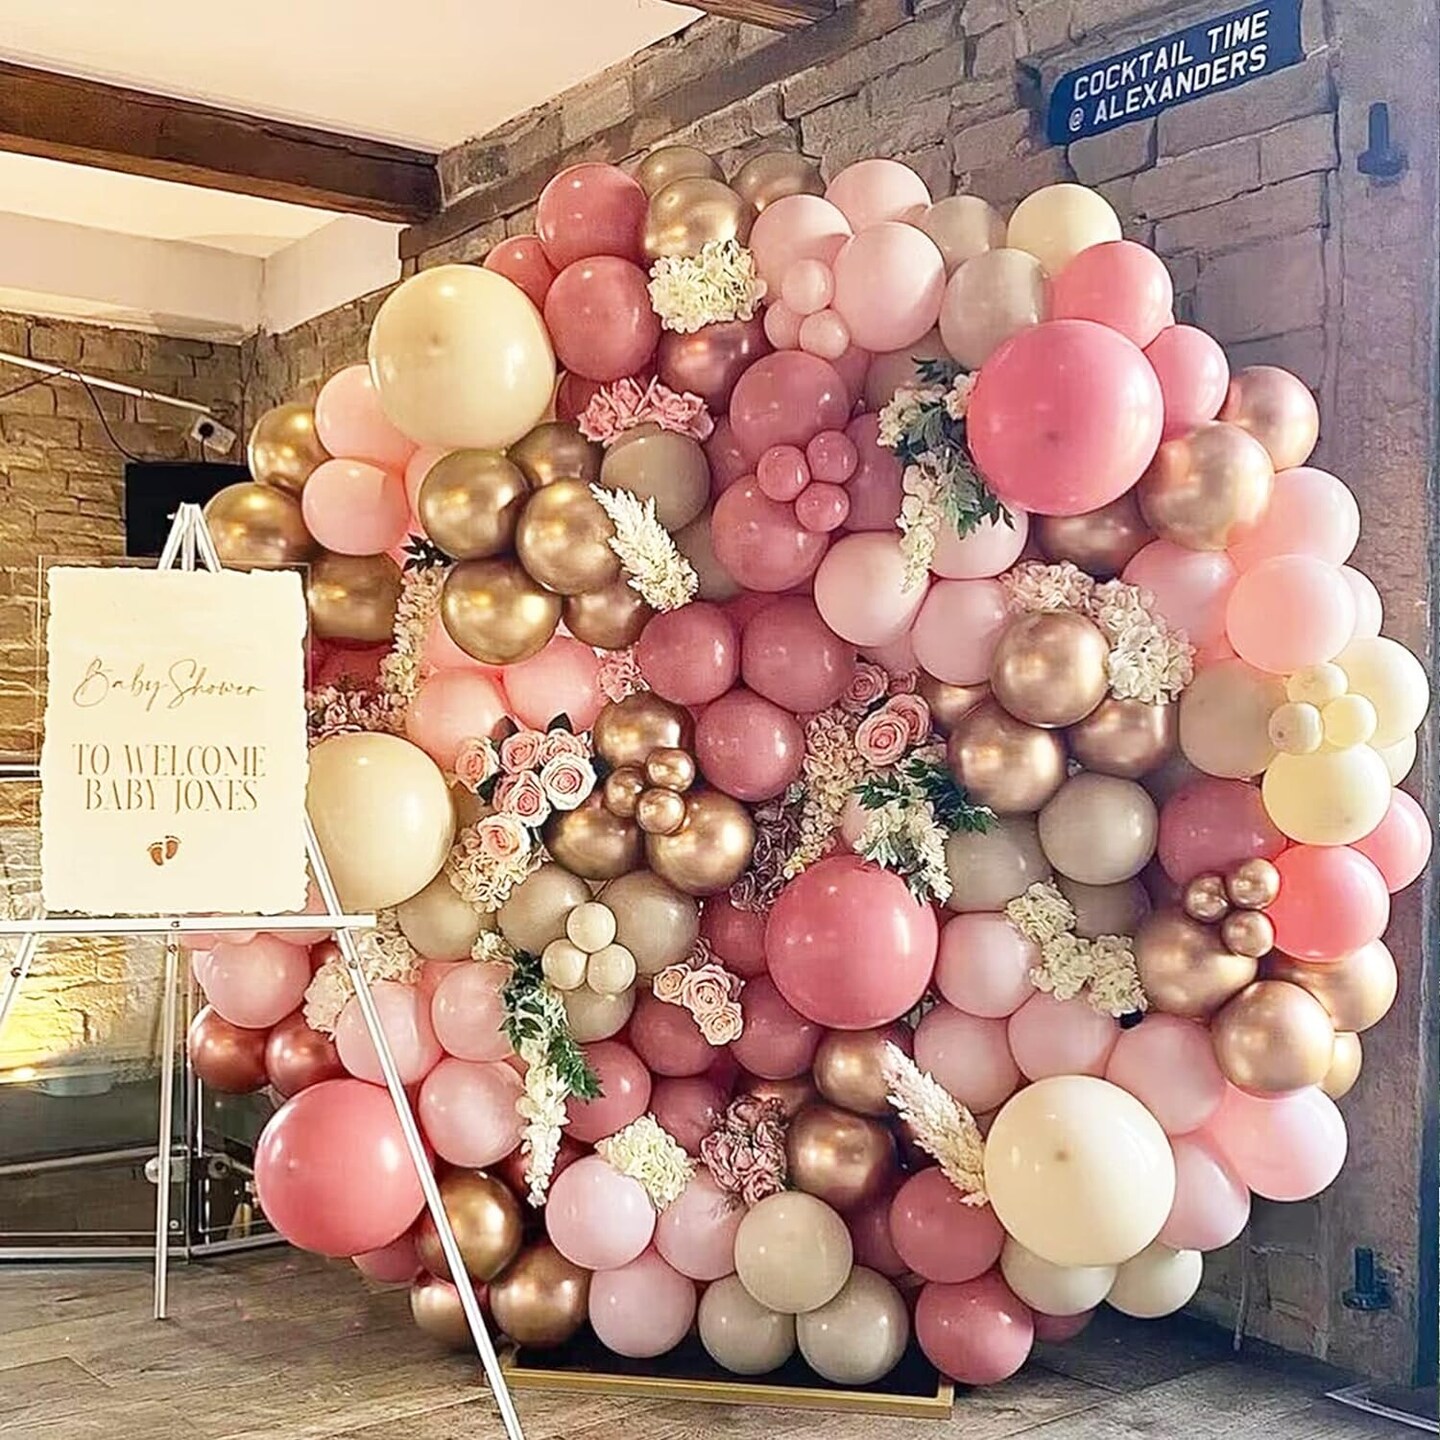 Retro Dusty Pink Balloons Garland Kit 171Pcs Pastel Light pink Nude Metallic Gold Balloon Arch For Wedding Princess Bridal Engagement Anniversary Girl Baby Shower Birthday Party Decorations